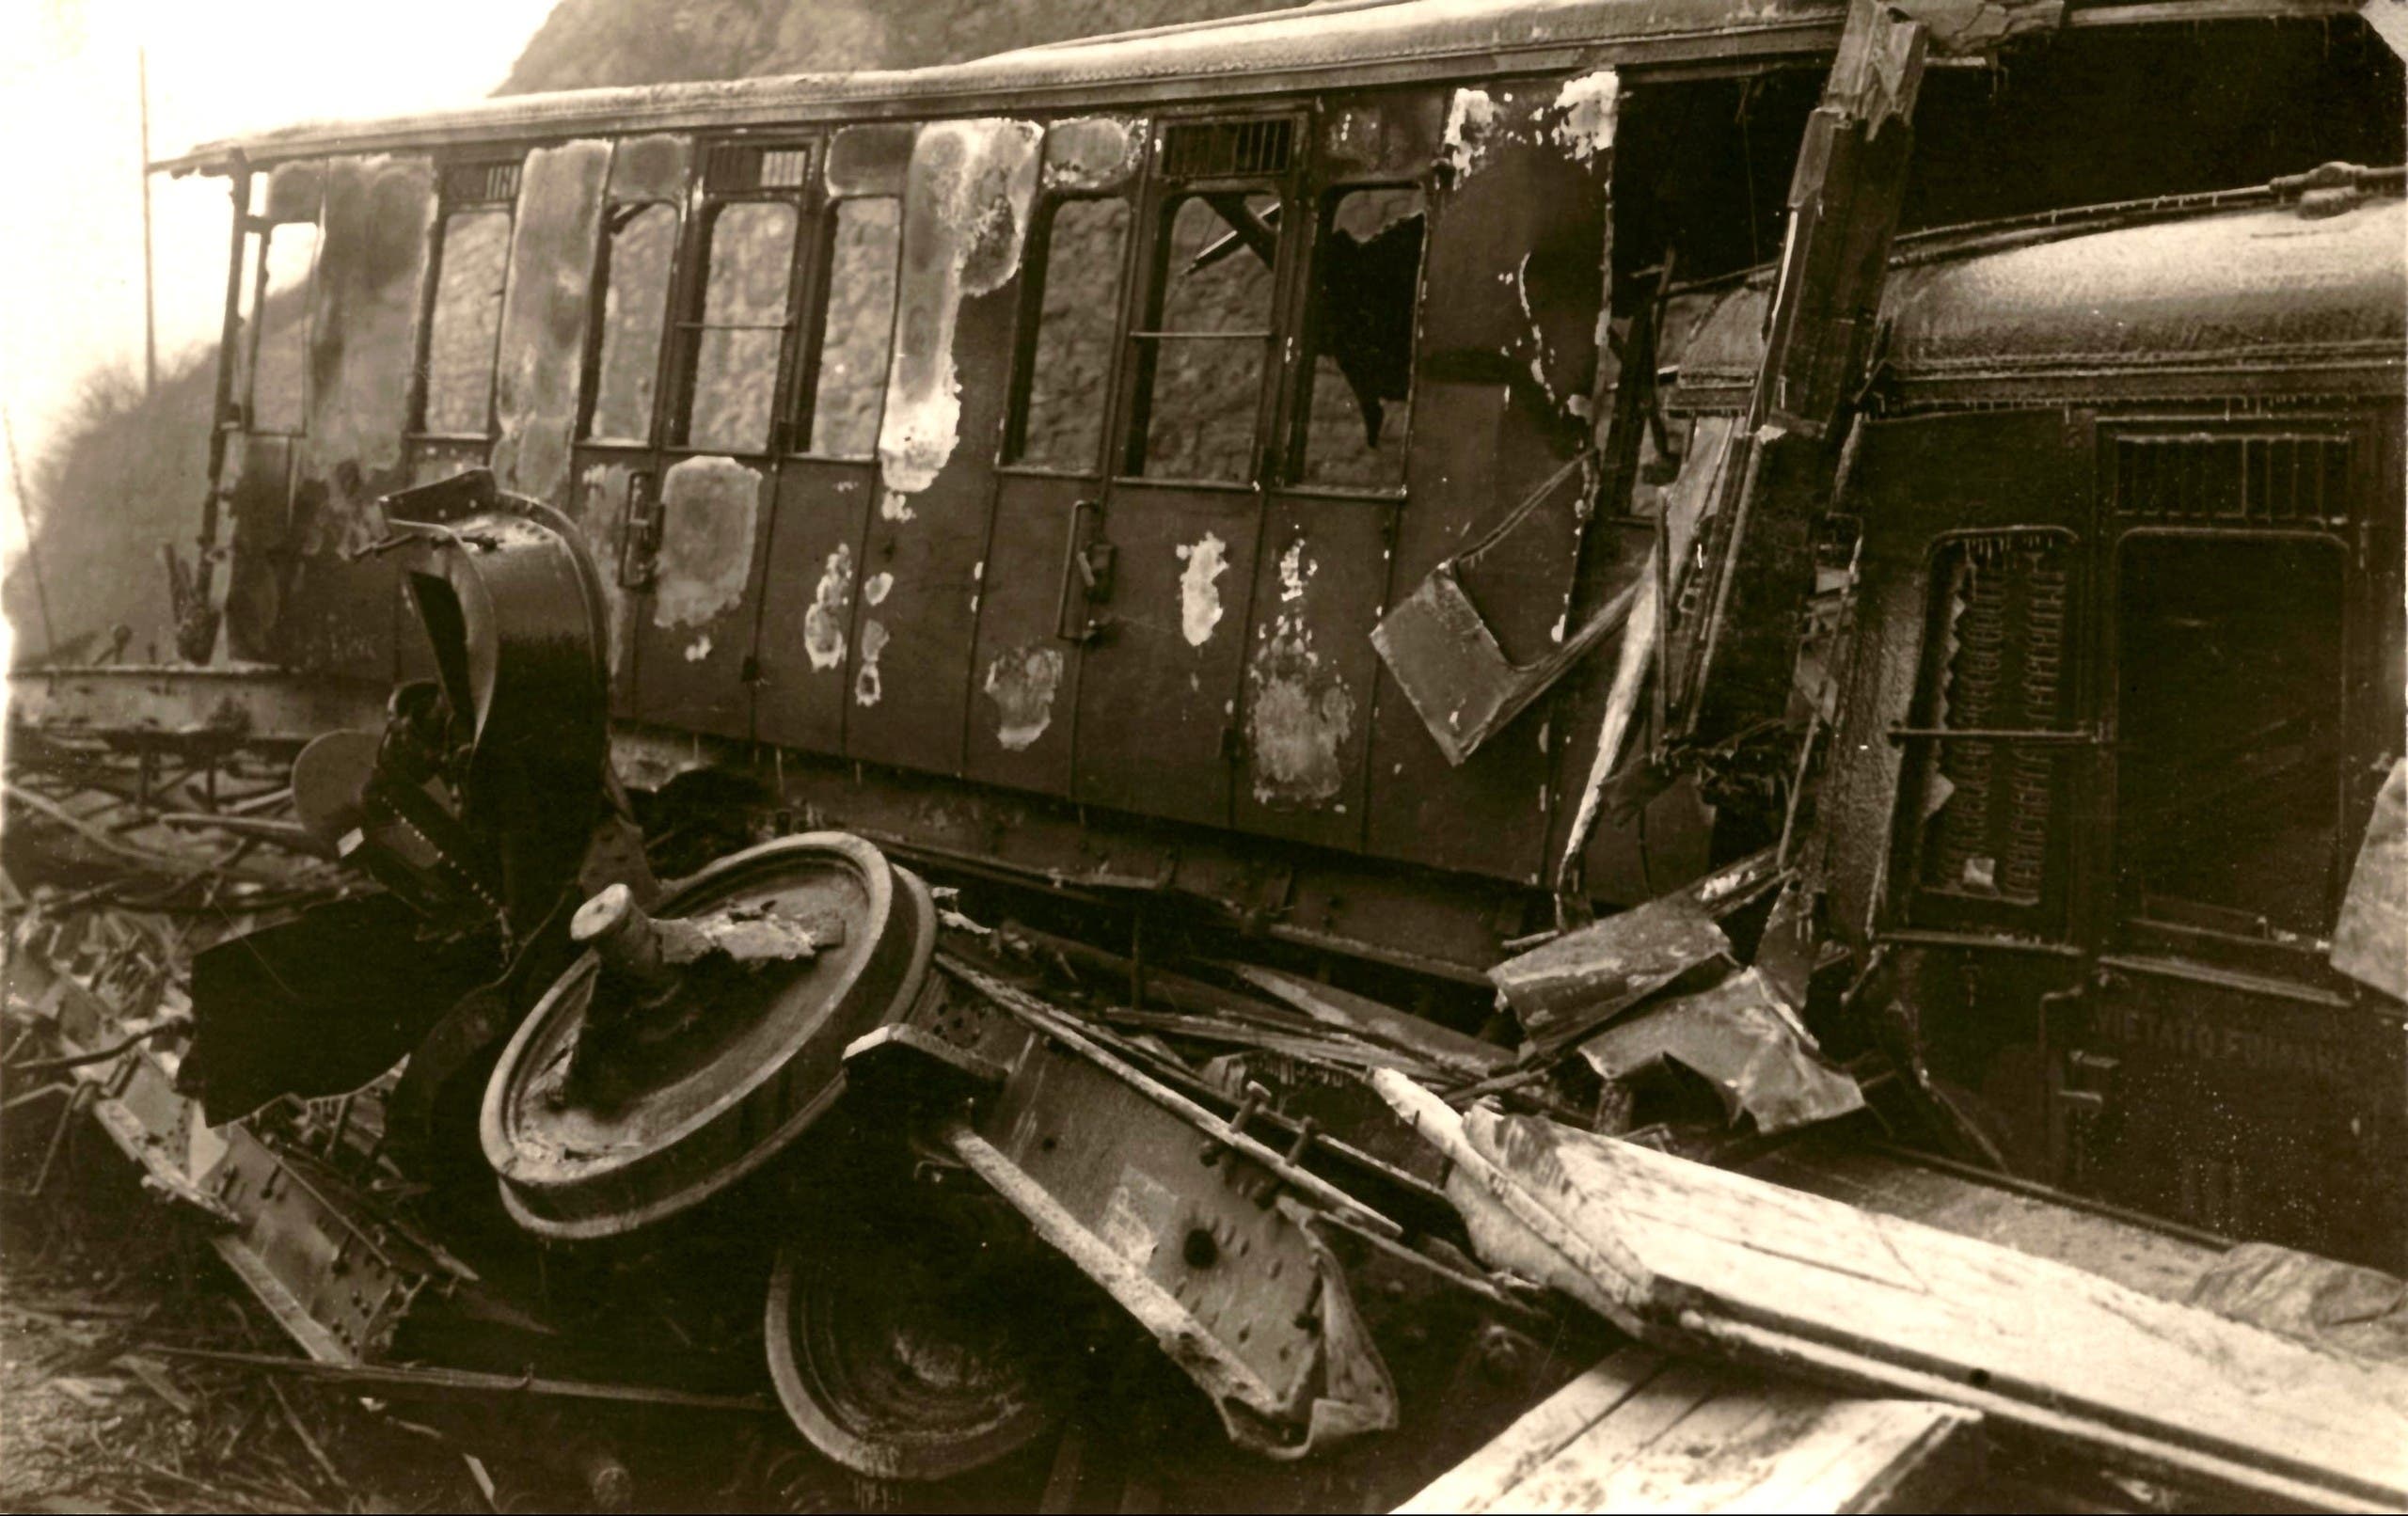 A photo of one of the destroyed vehicles after the accident